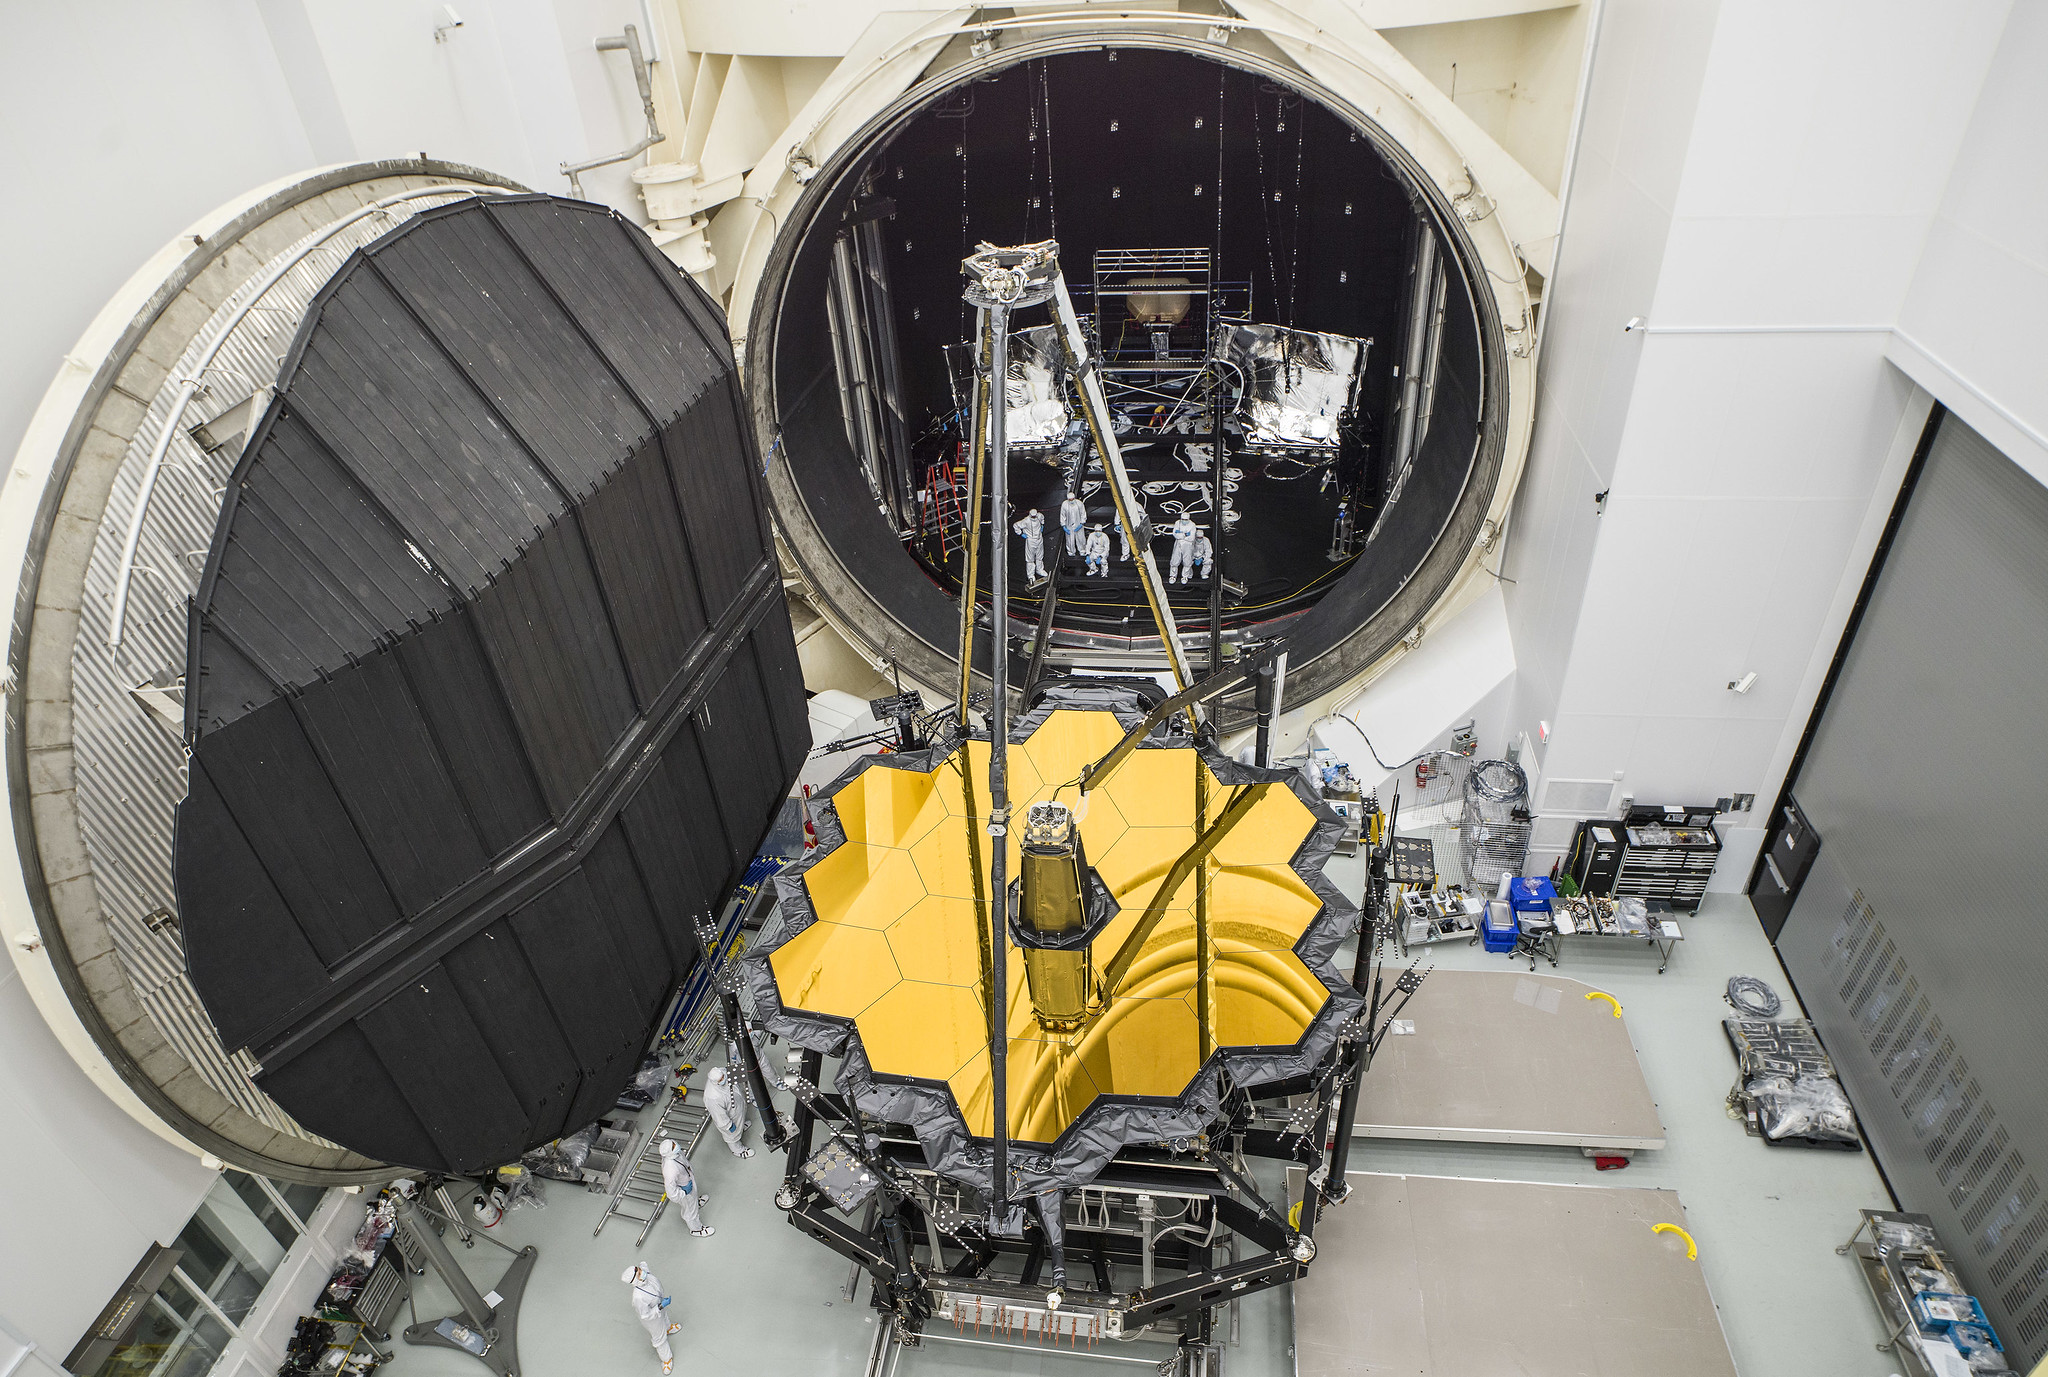 NASA's James Webb Space Telescope combined science instruments and optical element